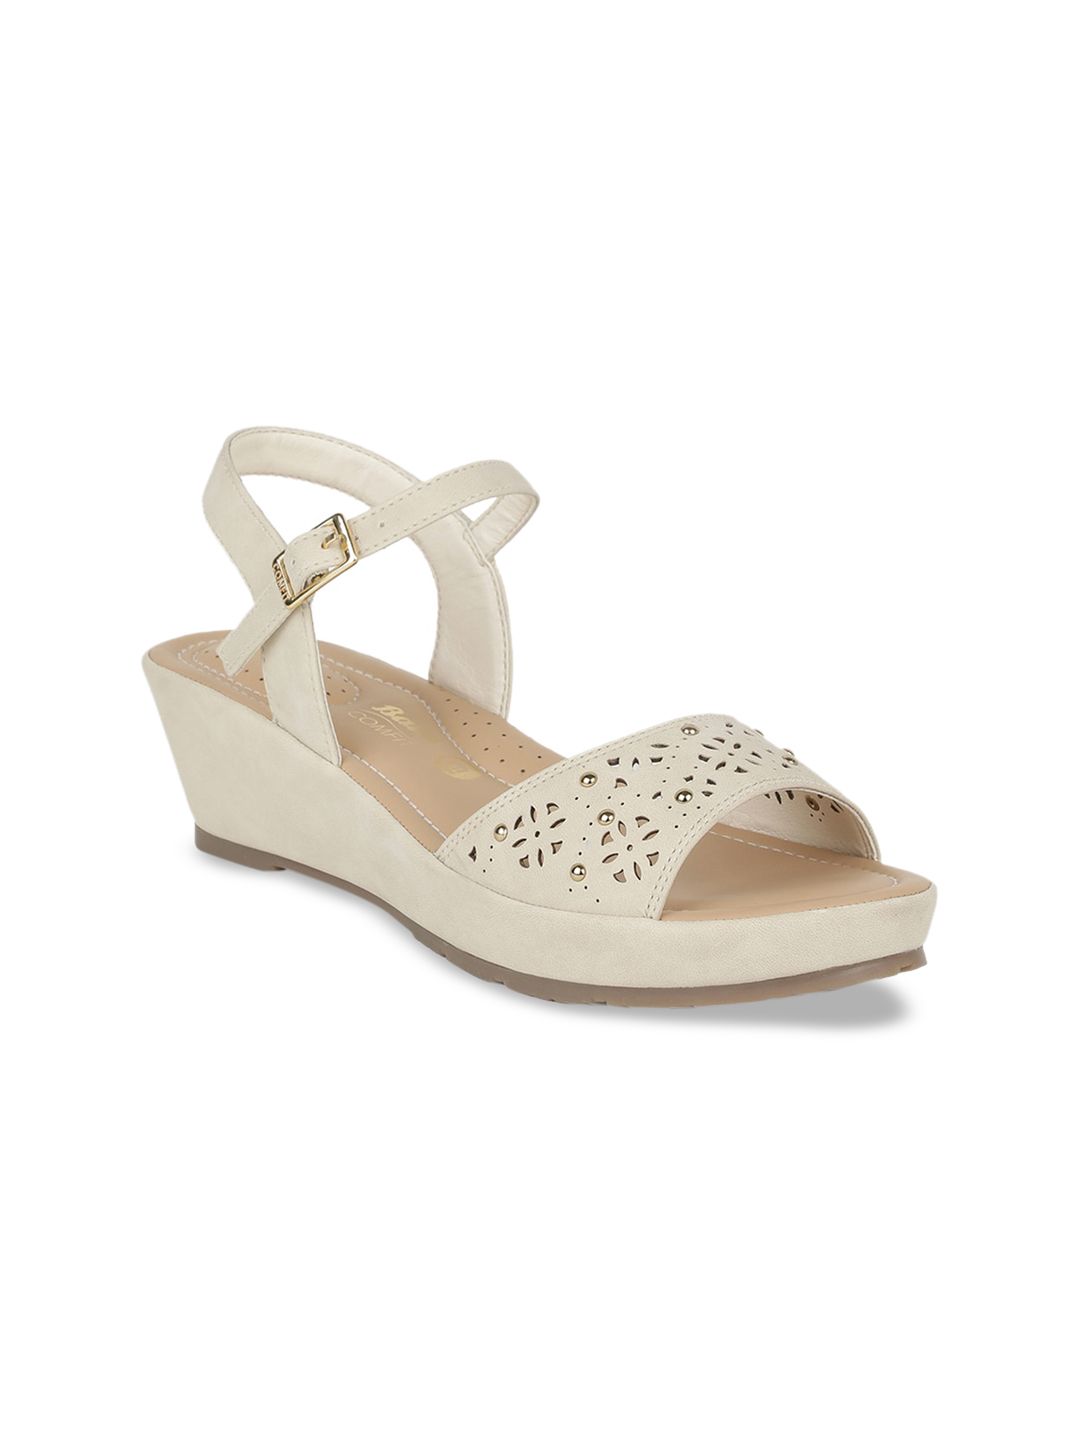 Bata Women White Embellished Sandals Price in India